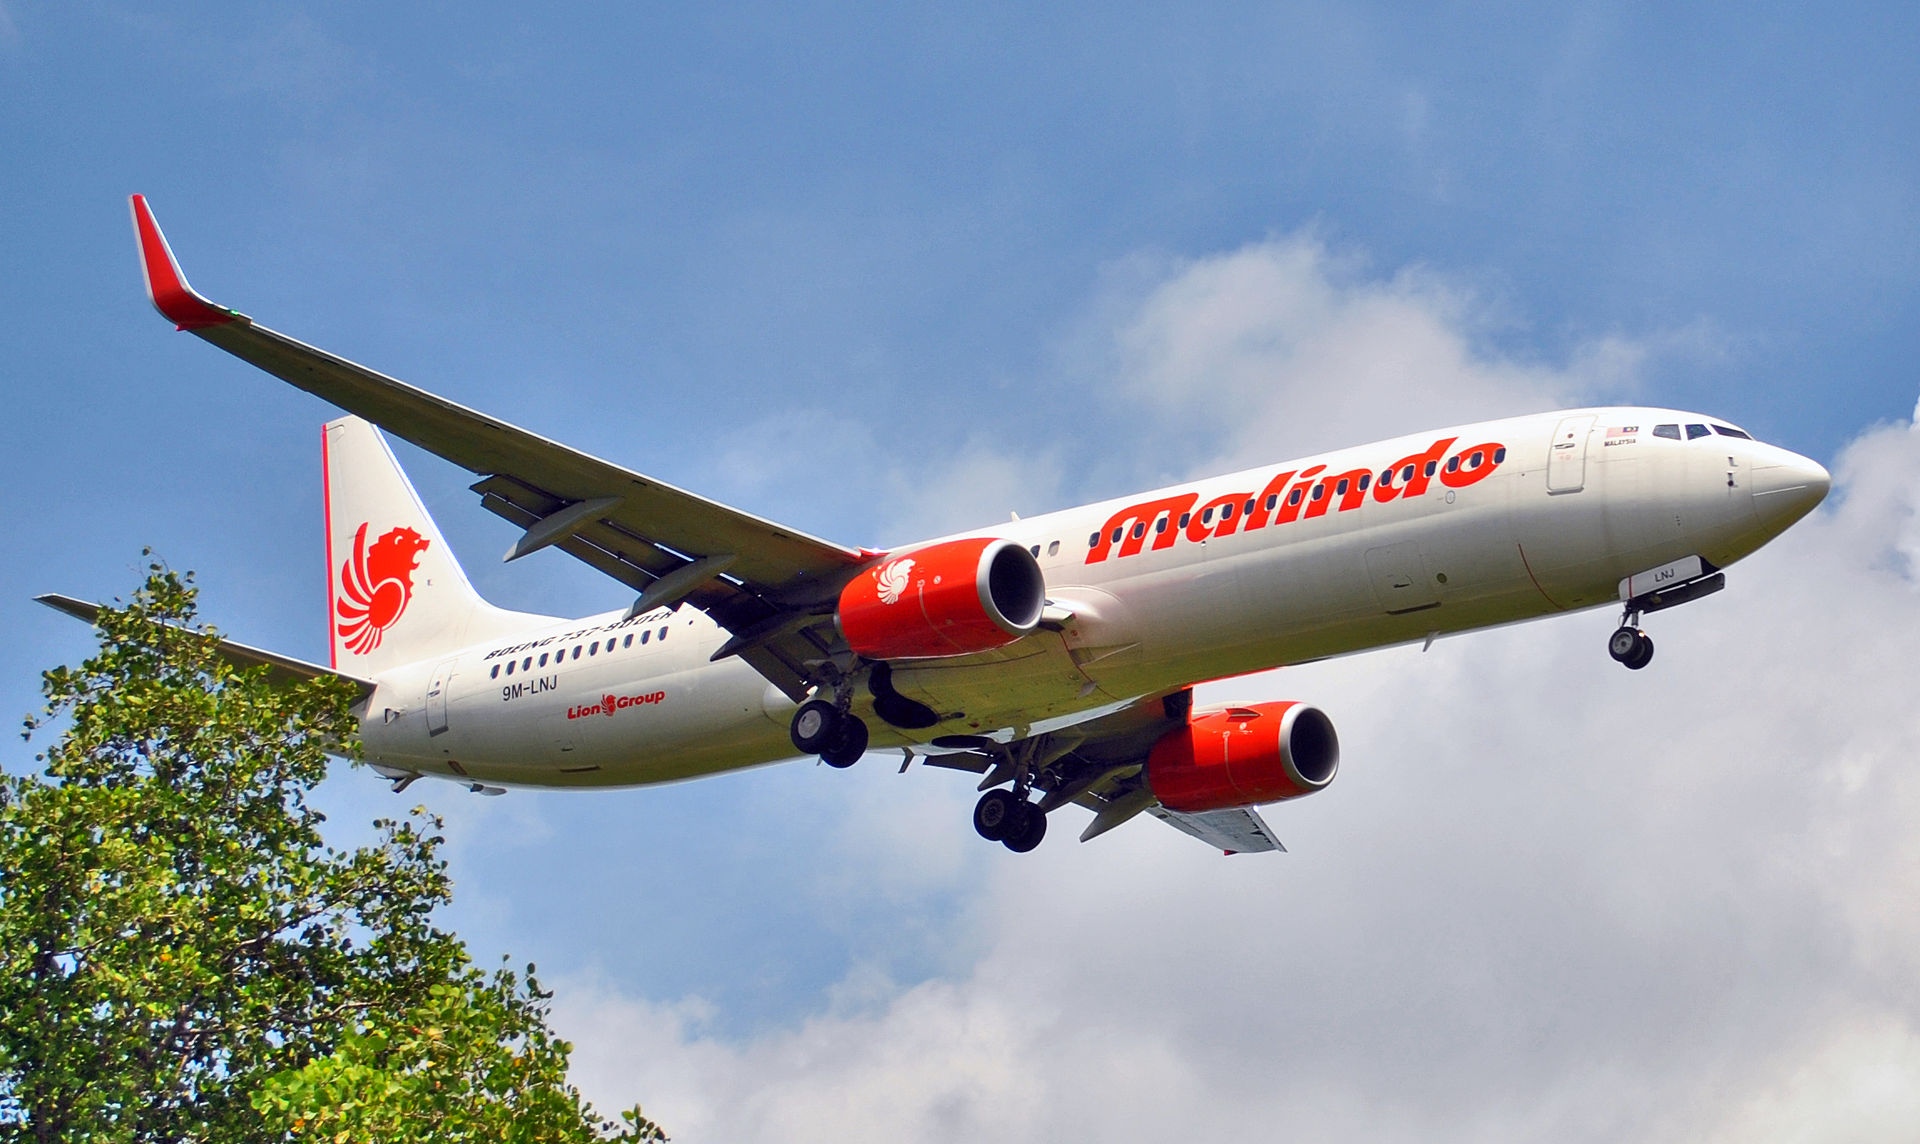 A Malindo Air jet lands in Bali in April 2014. Photo: Sabung Hamster via Wikimedia Commons